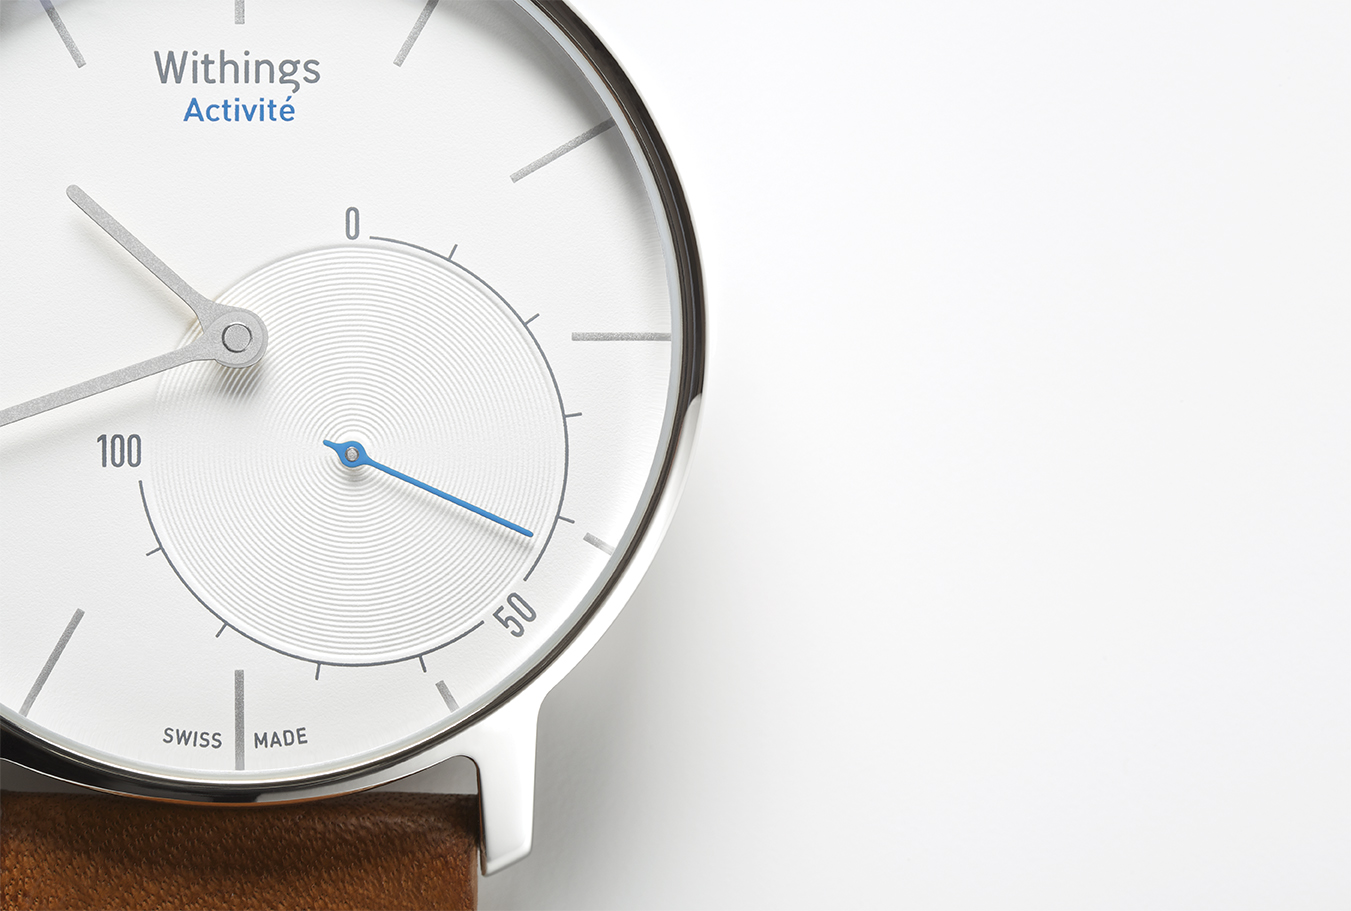 Withings Activité hybride activity tracker